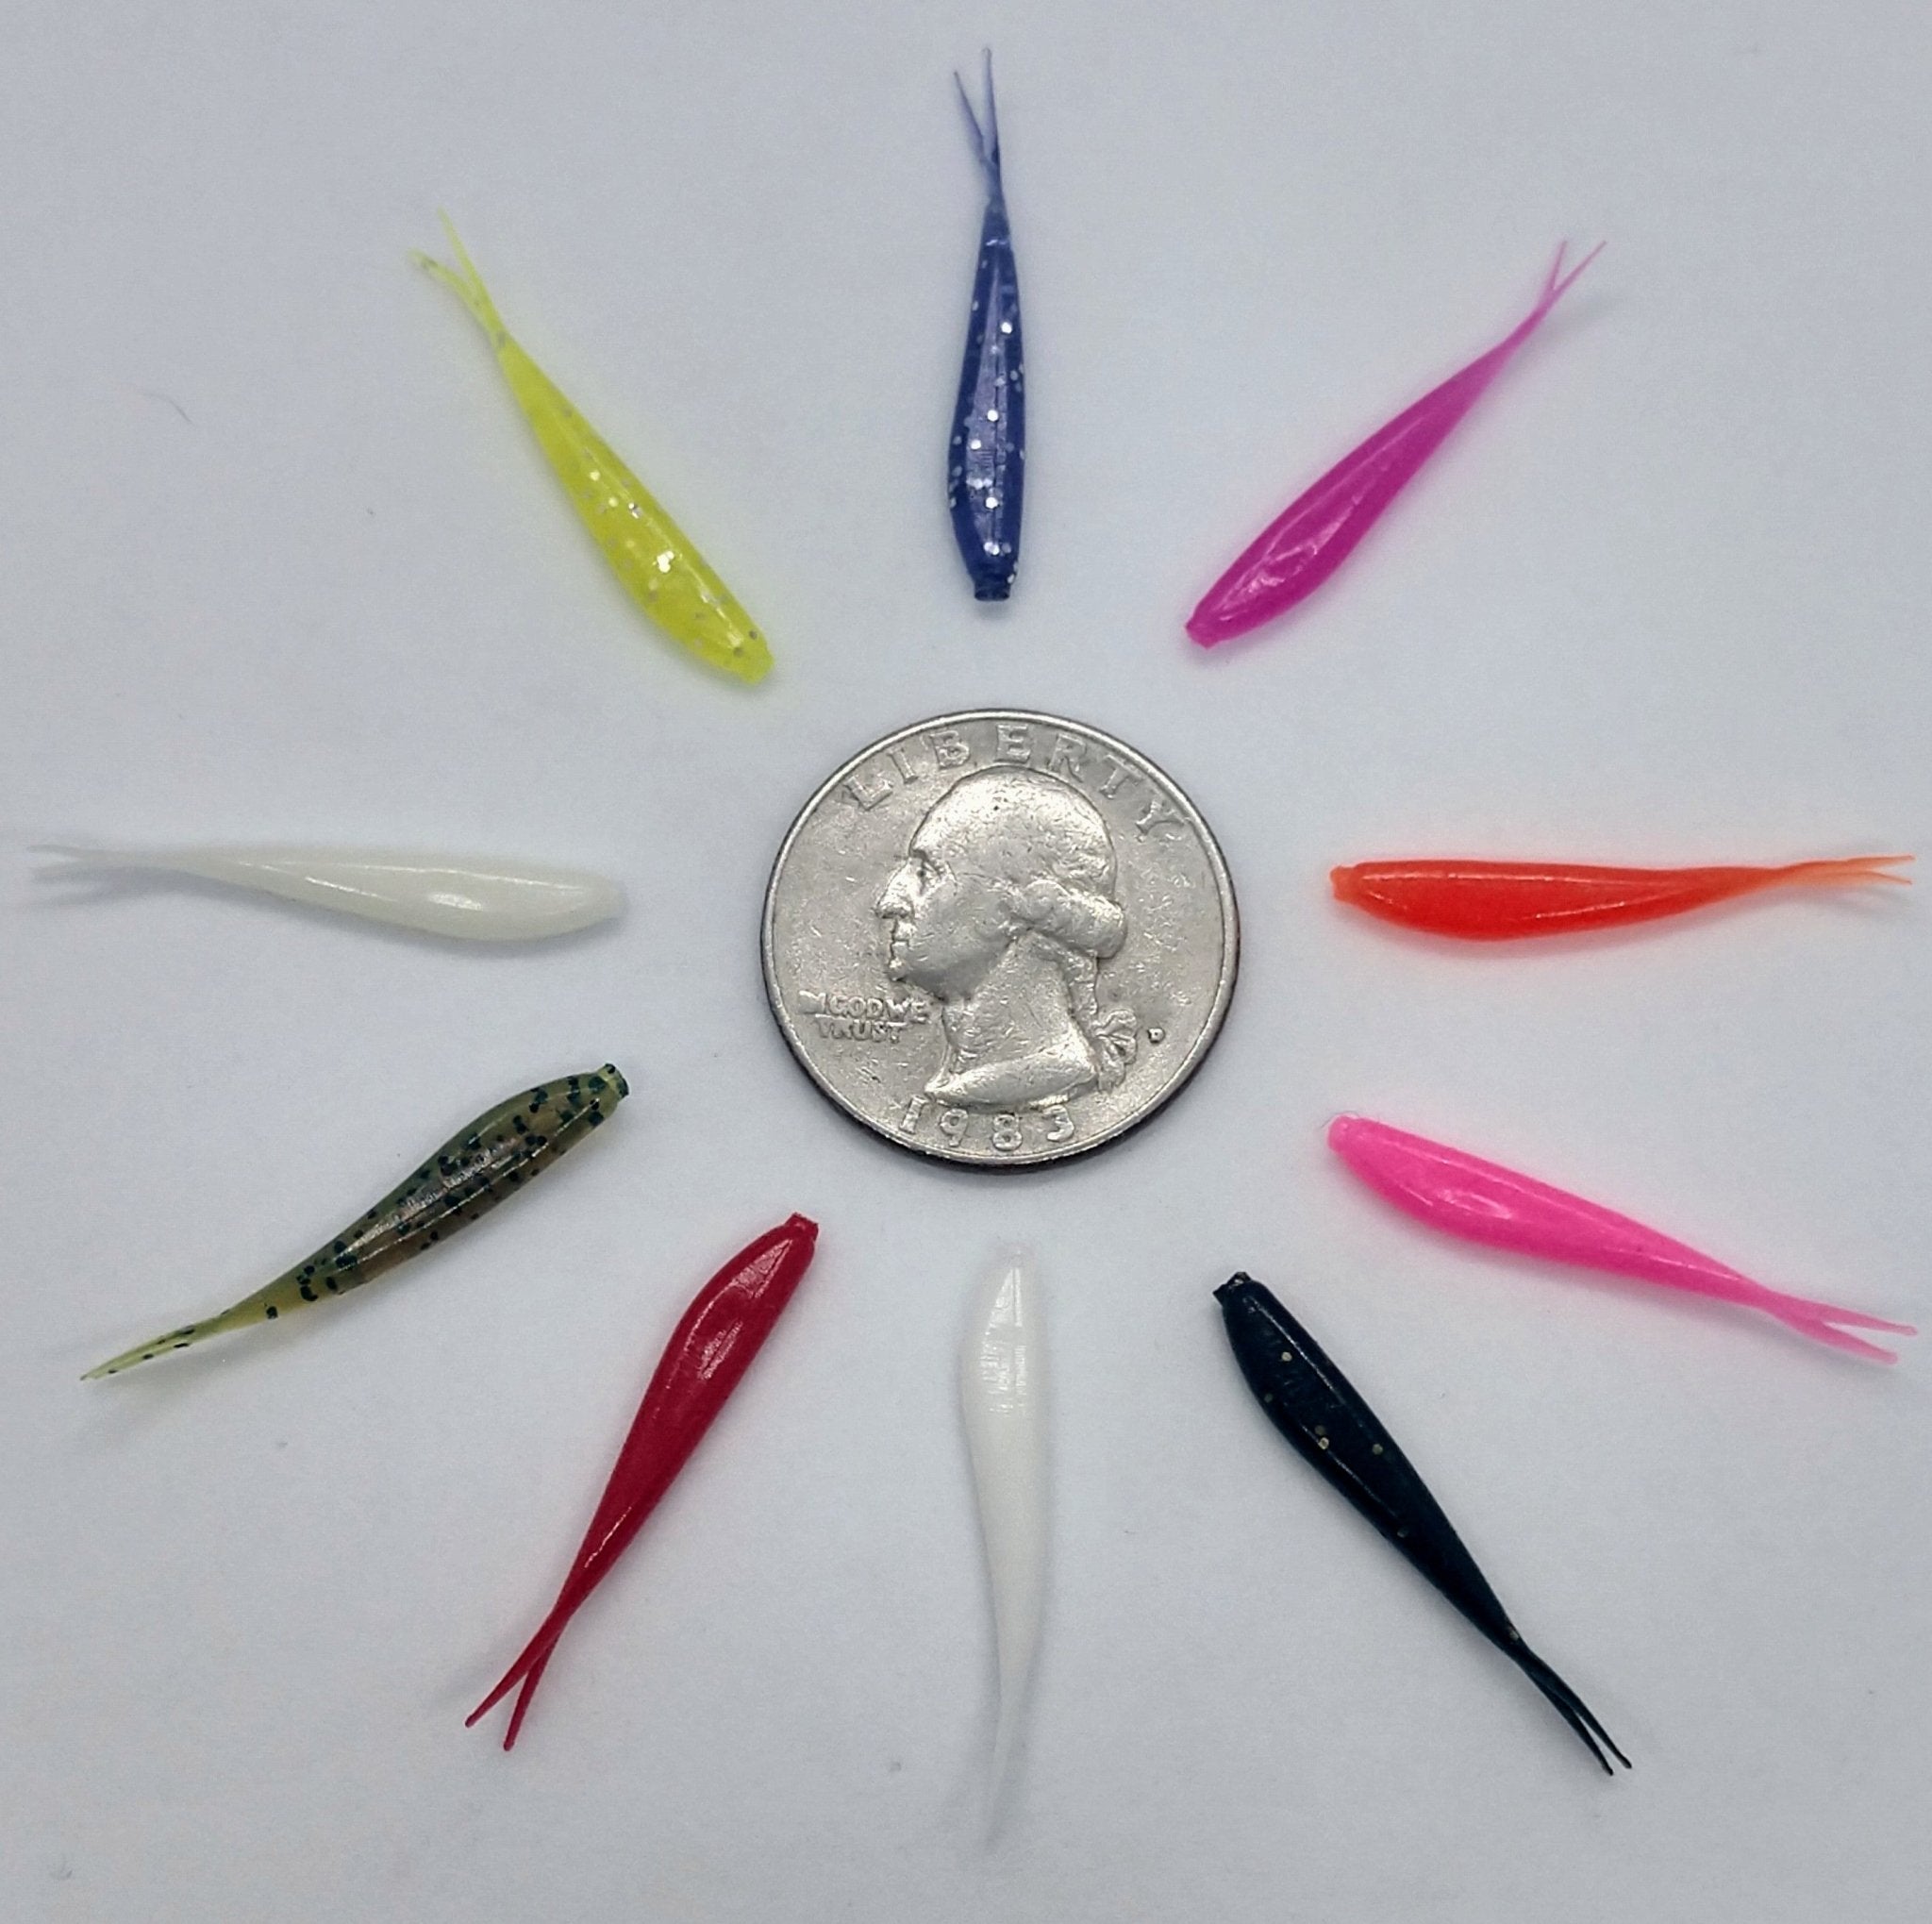 1 Micro Minnows – Digger's Jig Tails